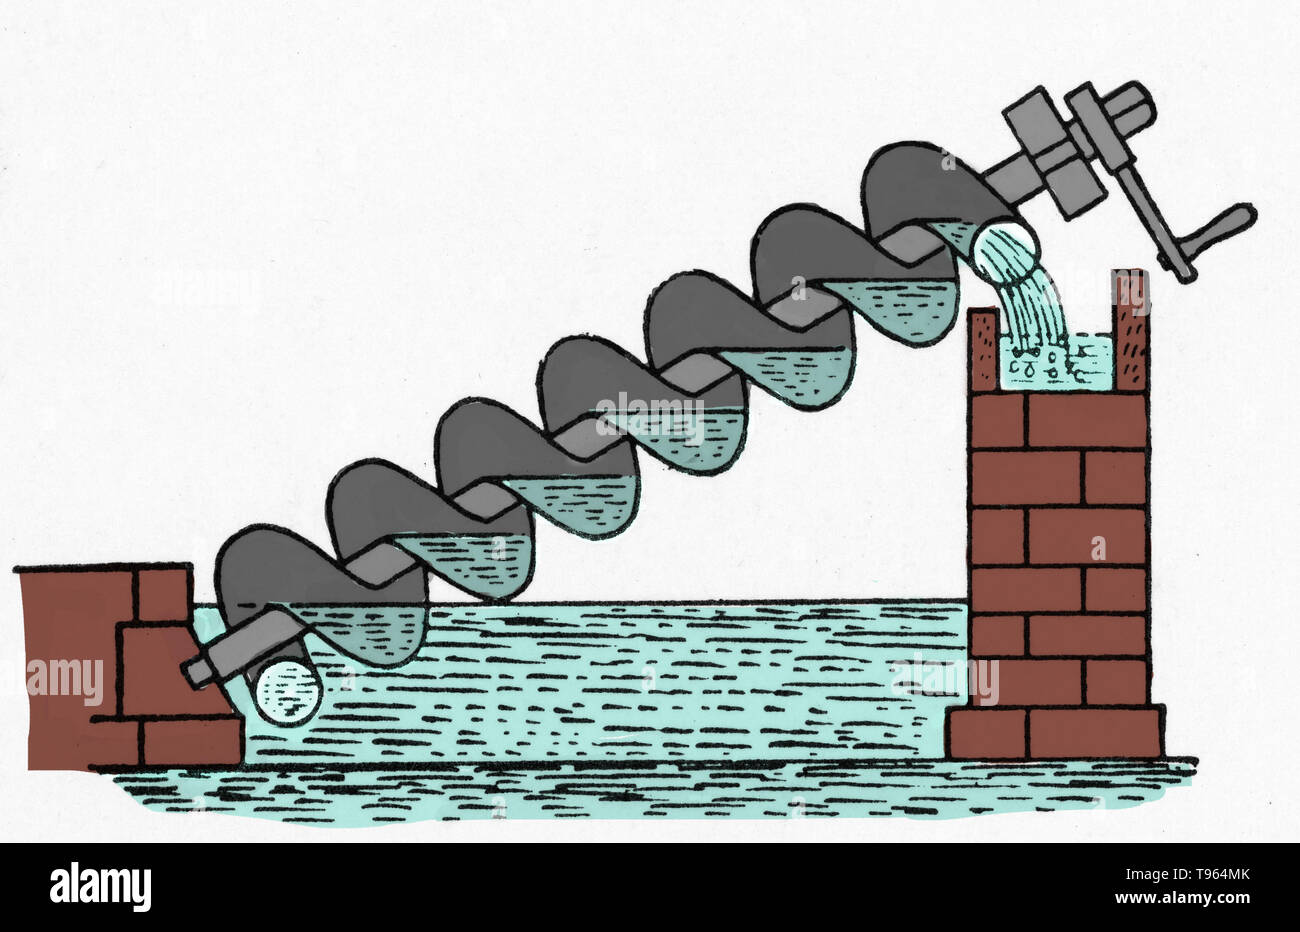 Archimedes' screw, also called the Archimedean screw or screwpump, is a machine historically used for transferring water from a low-lying body of water into irrigation ditches. Water is pumped by turning a screw-shaped surface inside a hollow pipe. The screw pump is commonly attributed to Archimedes on the occasion of his visit to Egypt. Stock Photo